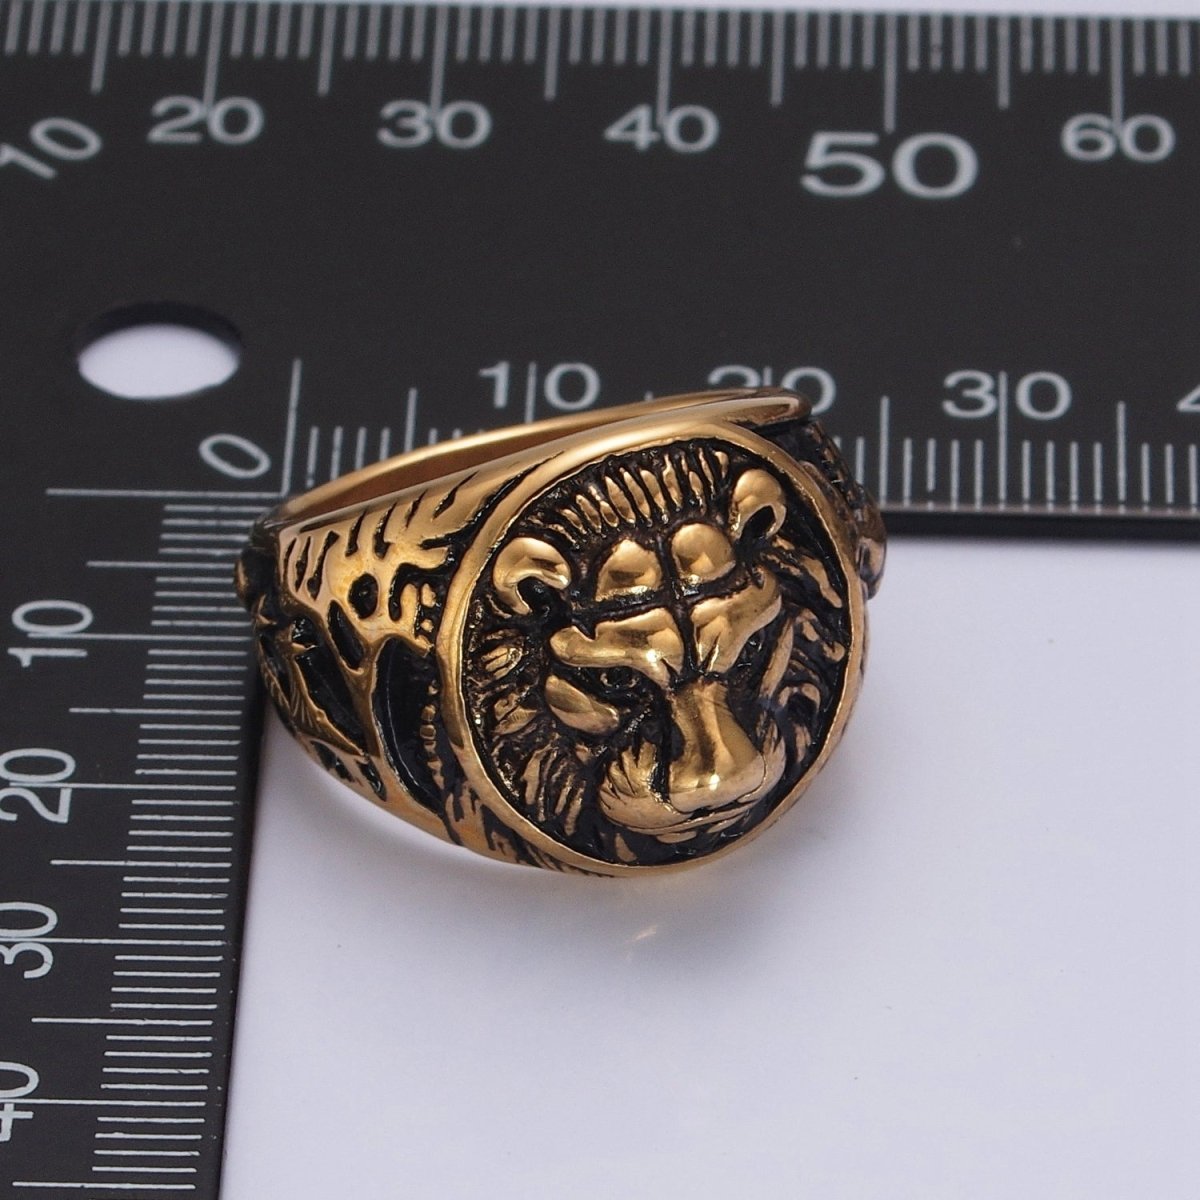 Men's Vintage Stainless Steel Ring Lion Head Shield Biker Gold / Silver Band Men Jewelry S-049 S-050 S-051 S-052 - DLUXCA